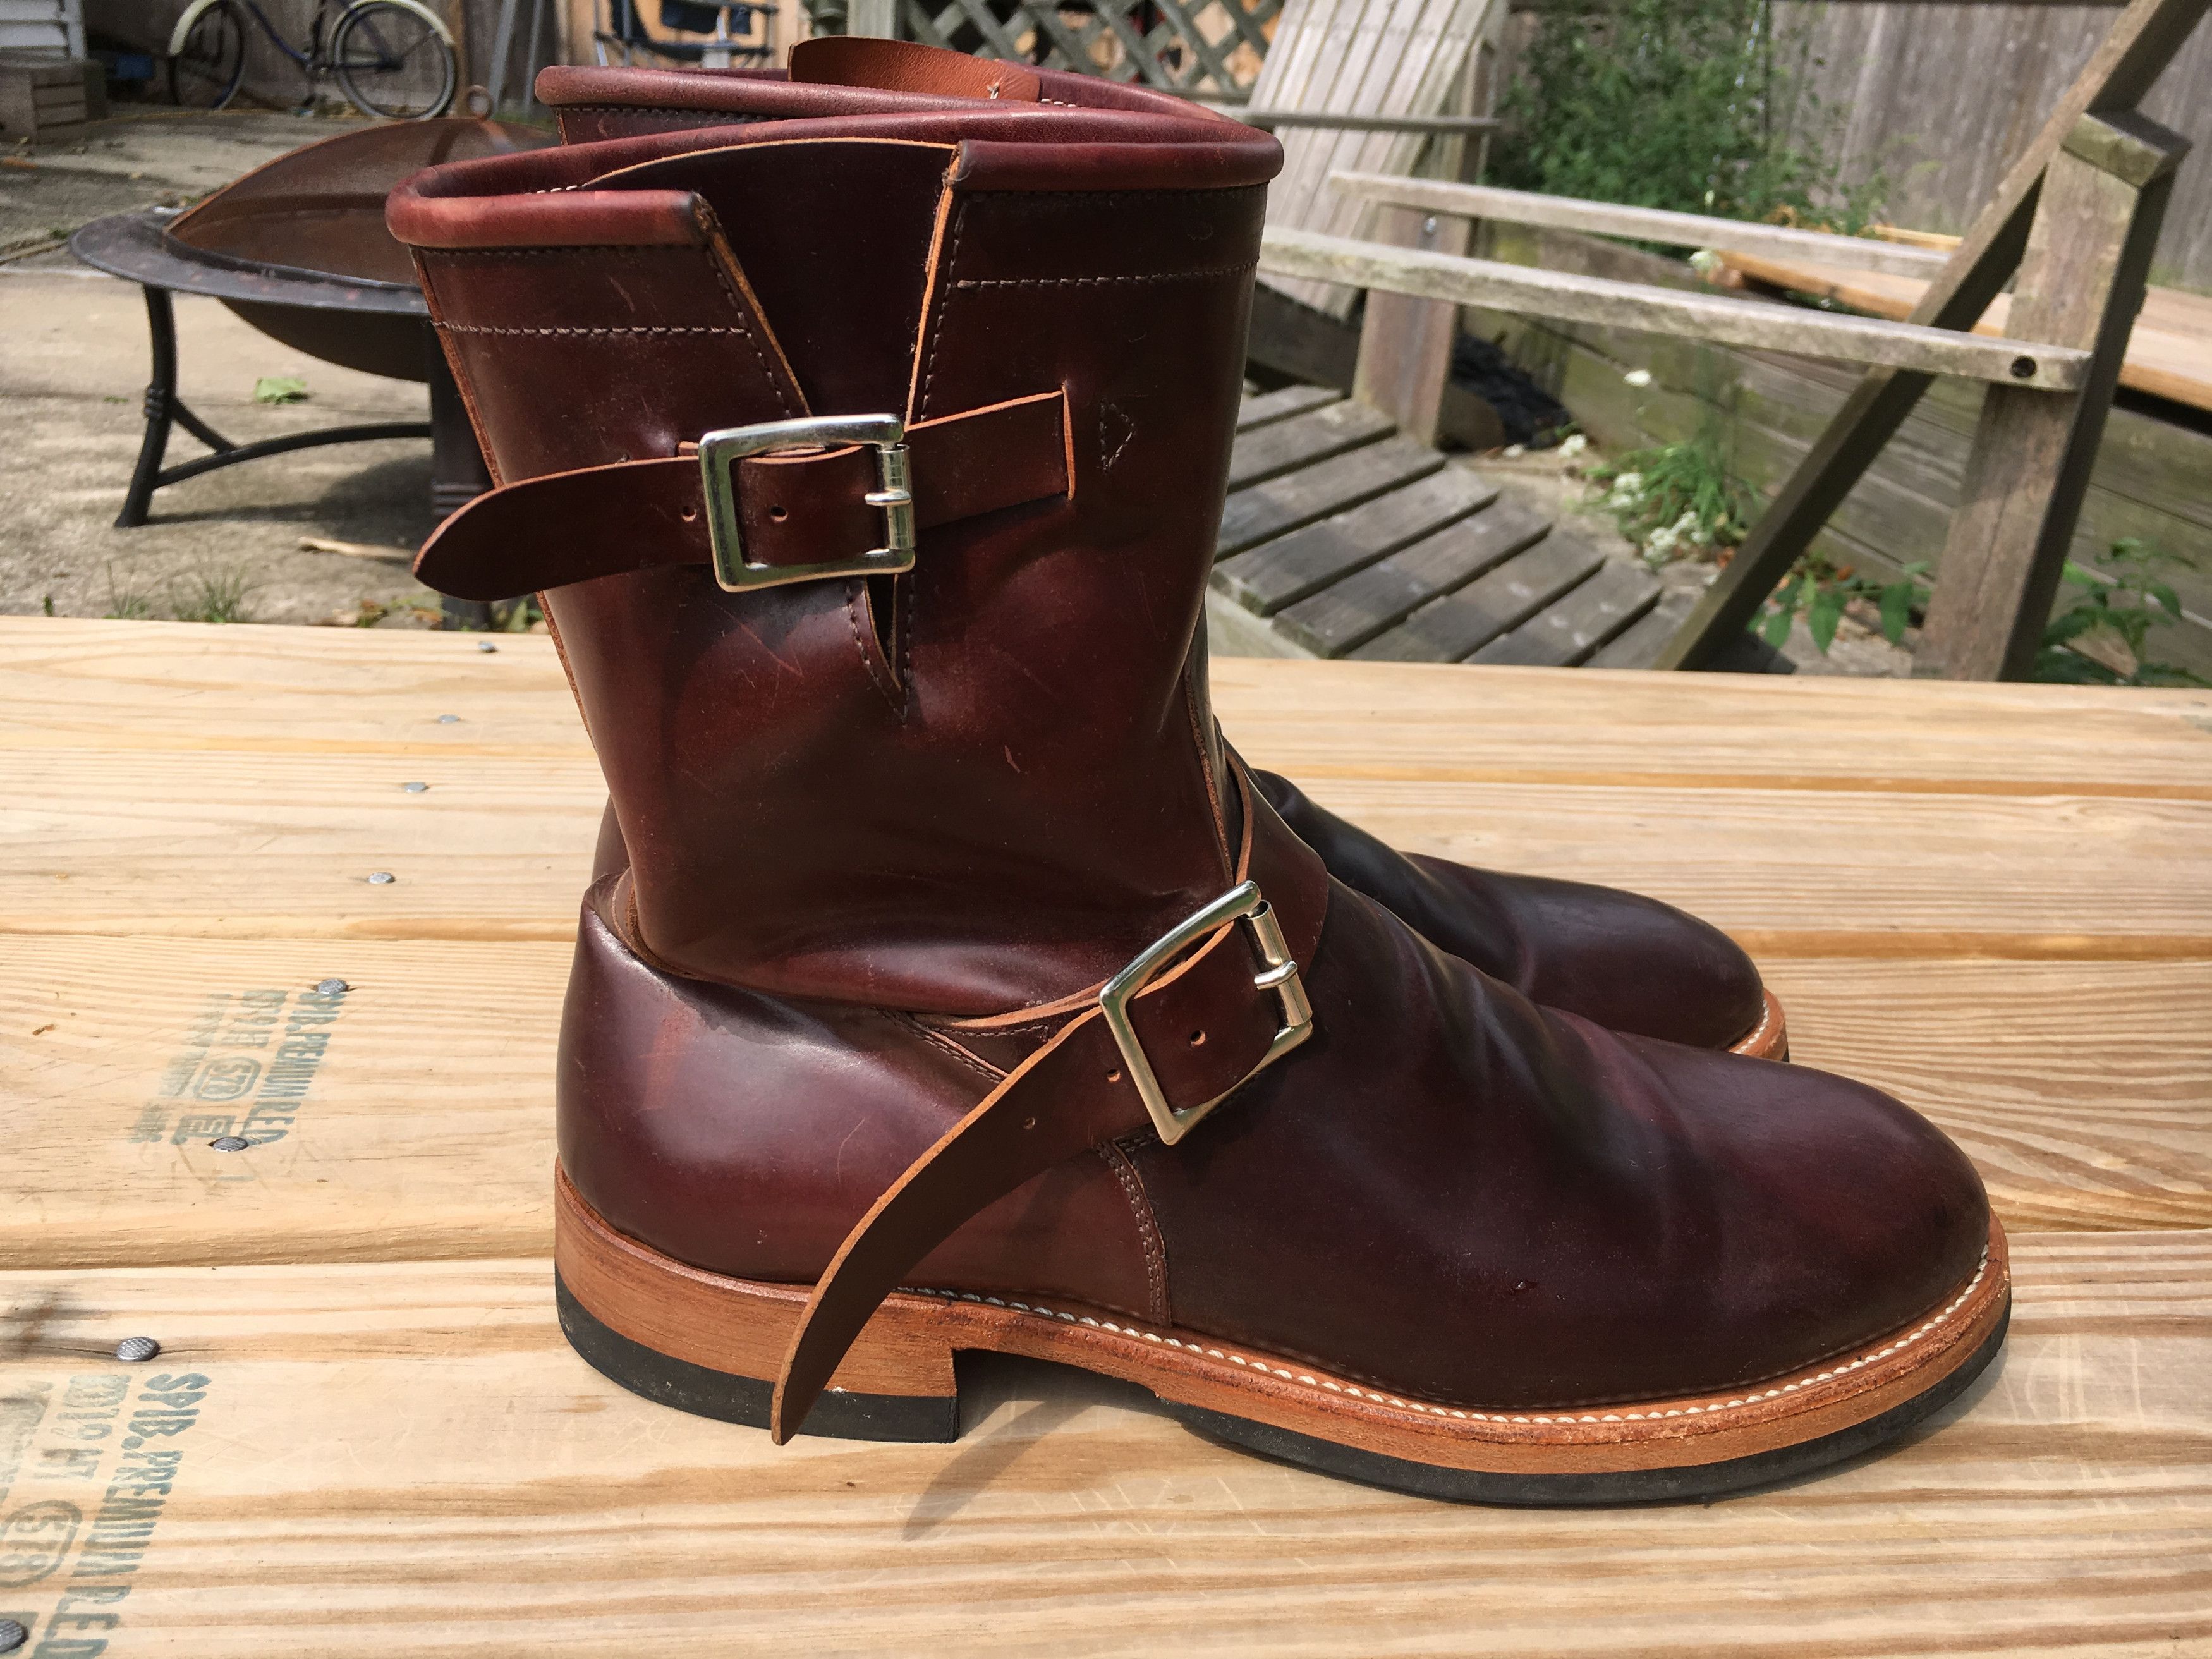 Needles Horween No. 8 Shell Cordovan Engineer Boots Size US 10 / EU 43 - 2 Preview